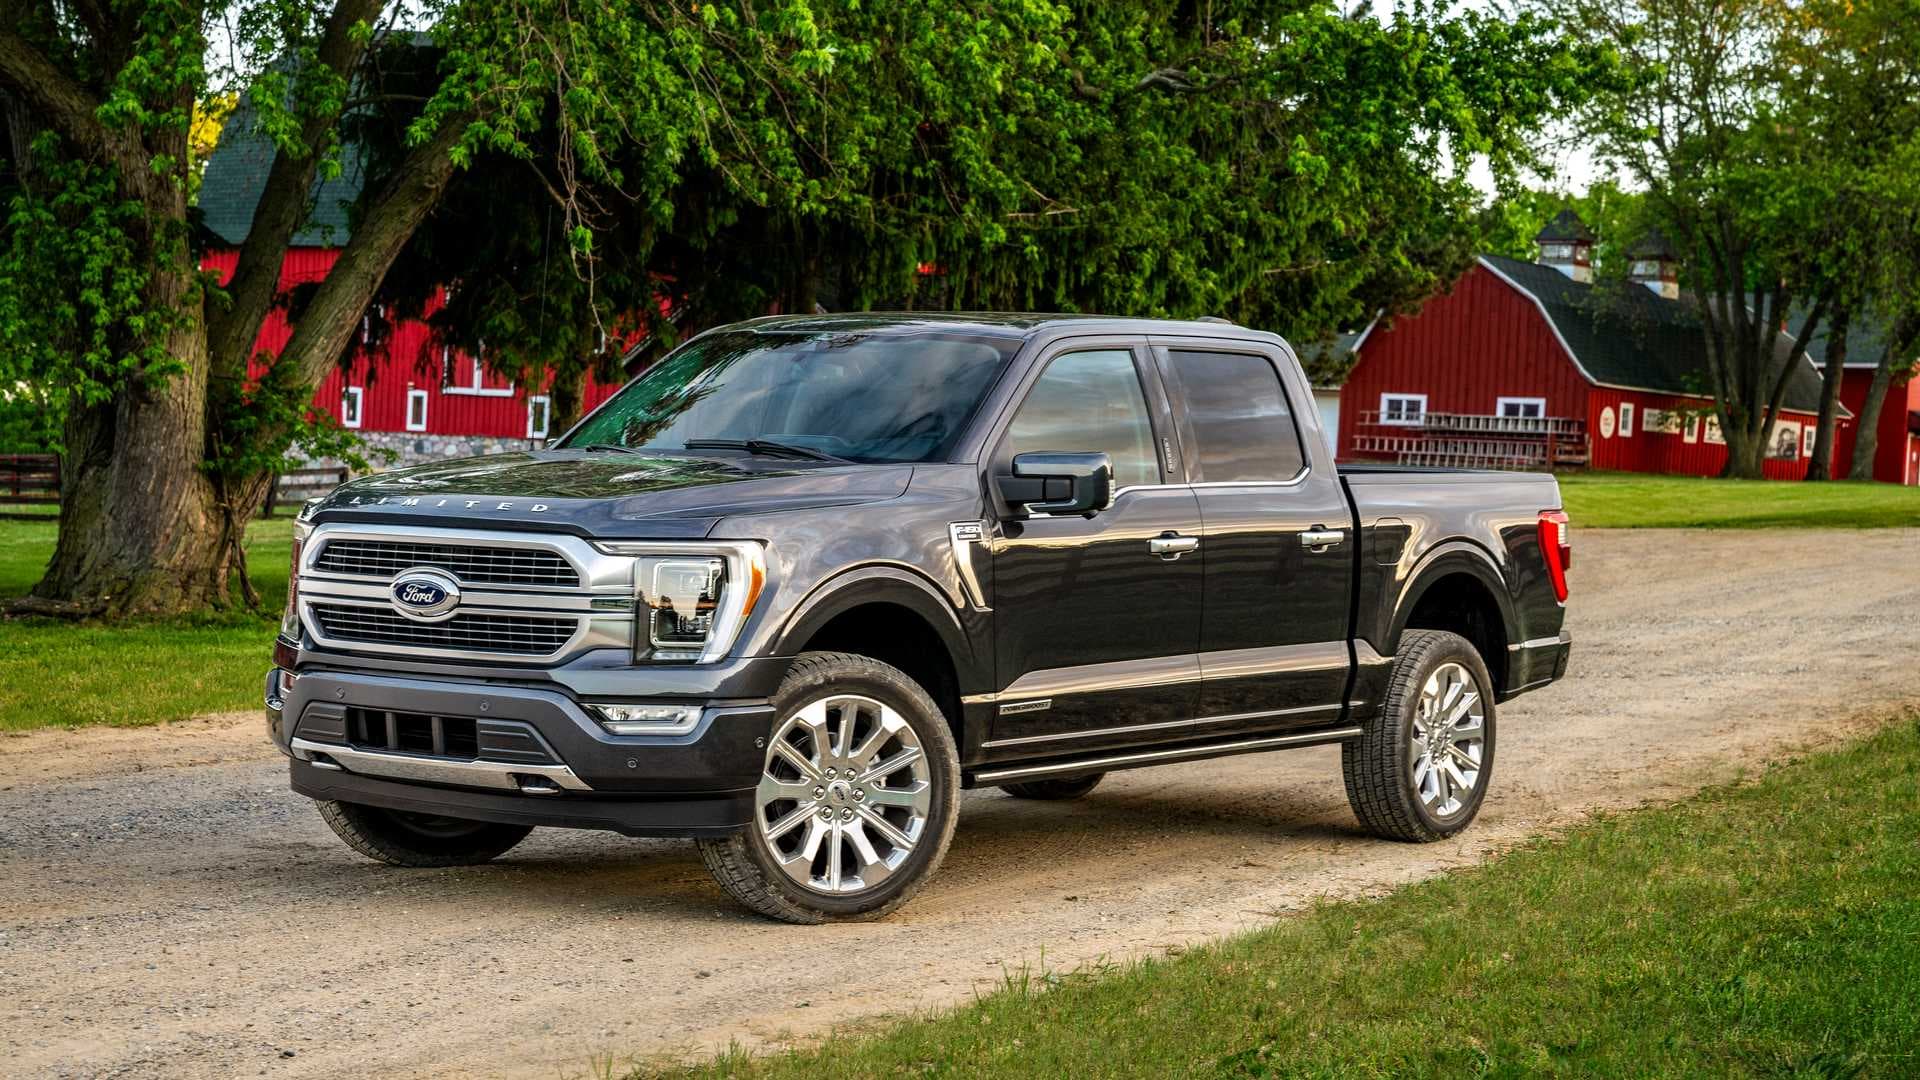 2021 Ford F-150 PowerBoost Hybrid: Everything You Need to Know